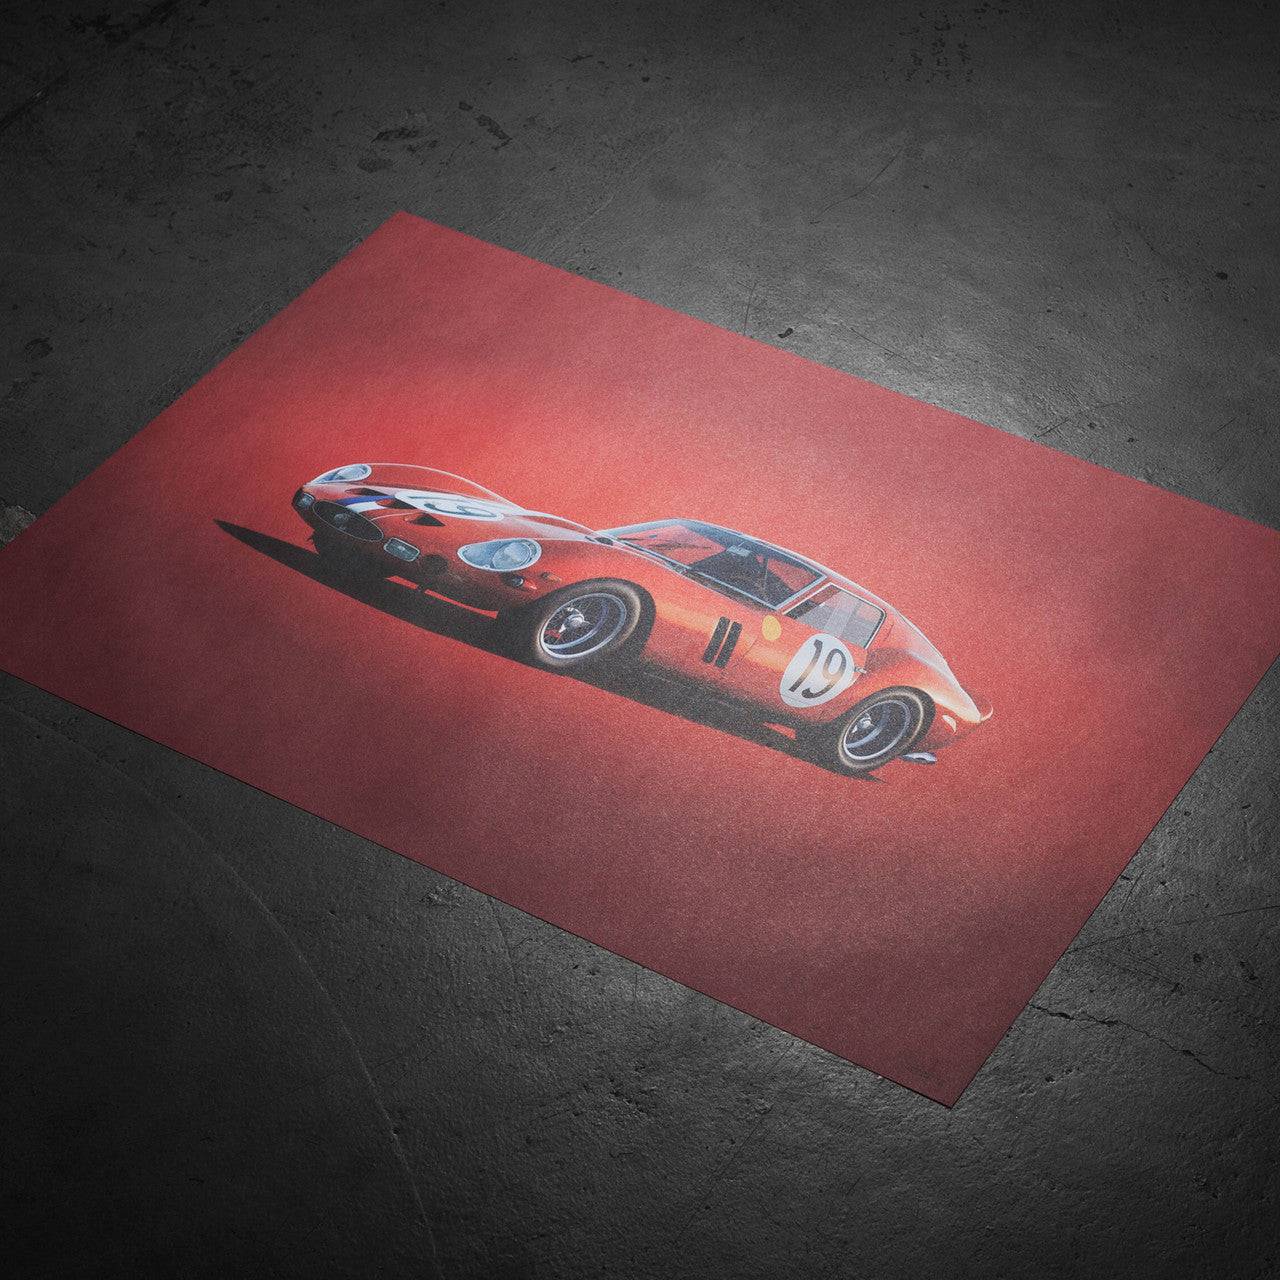 Ferrari 250 GTO - Red - 24h Le Mans - 1962 - Colors of Speed Poster